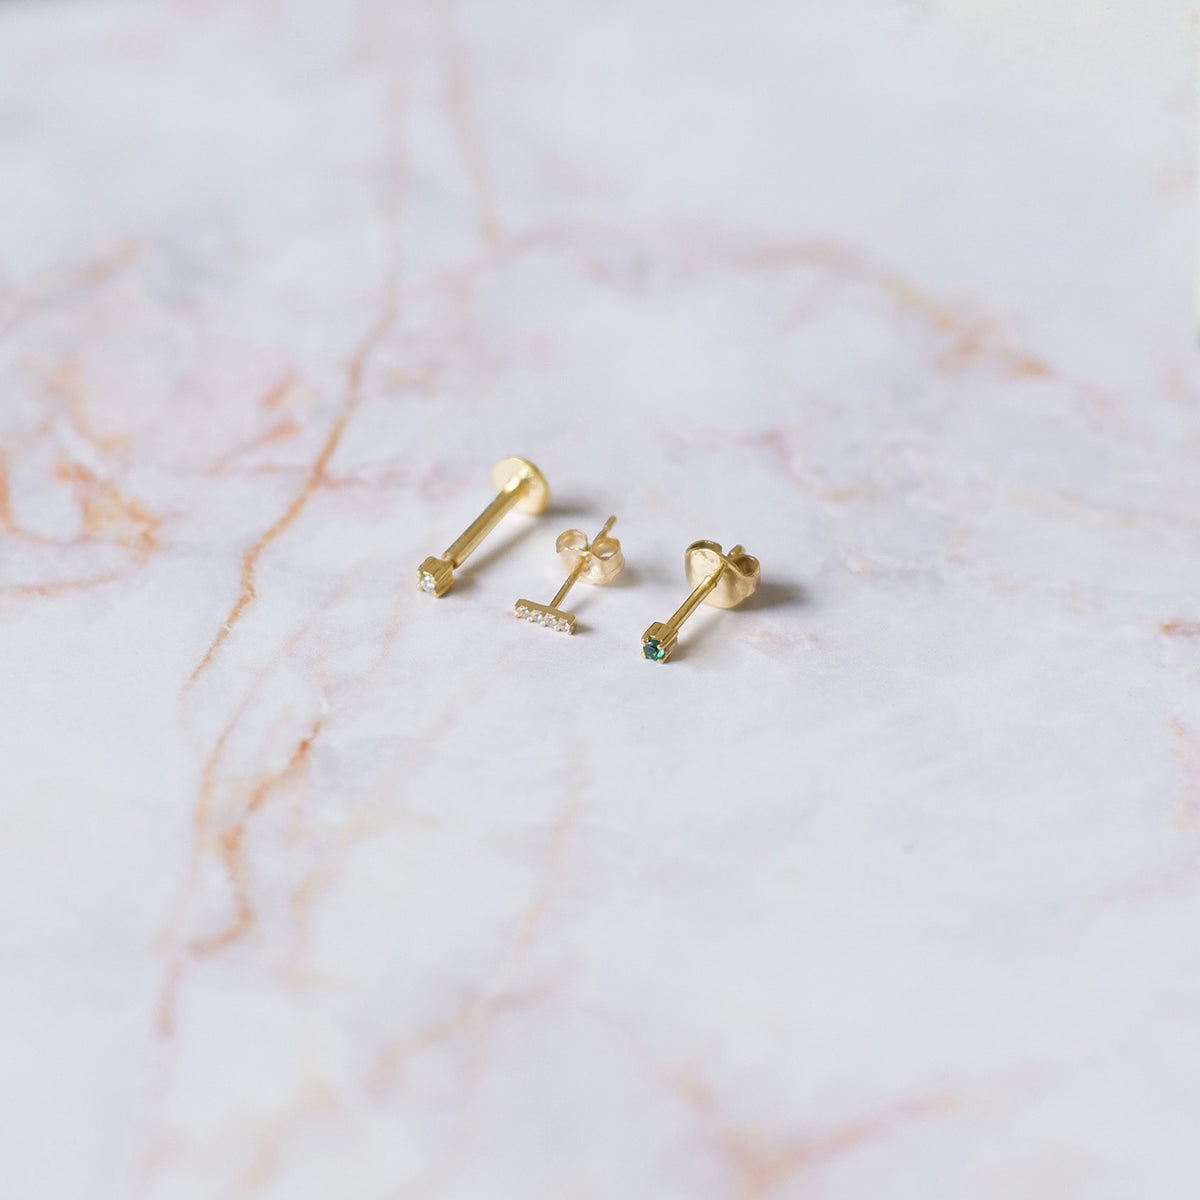 The Tiny Solitaire Diamond Earrings in Solid Gold